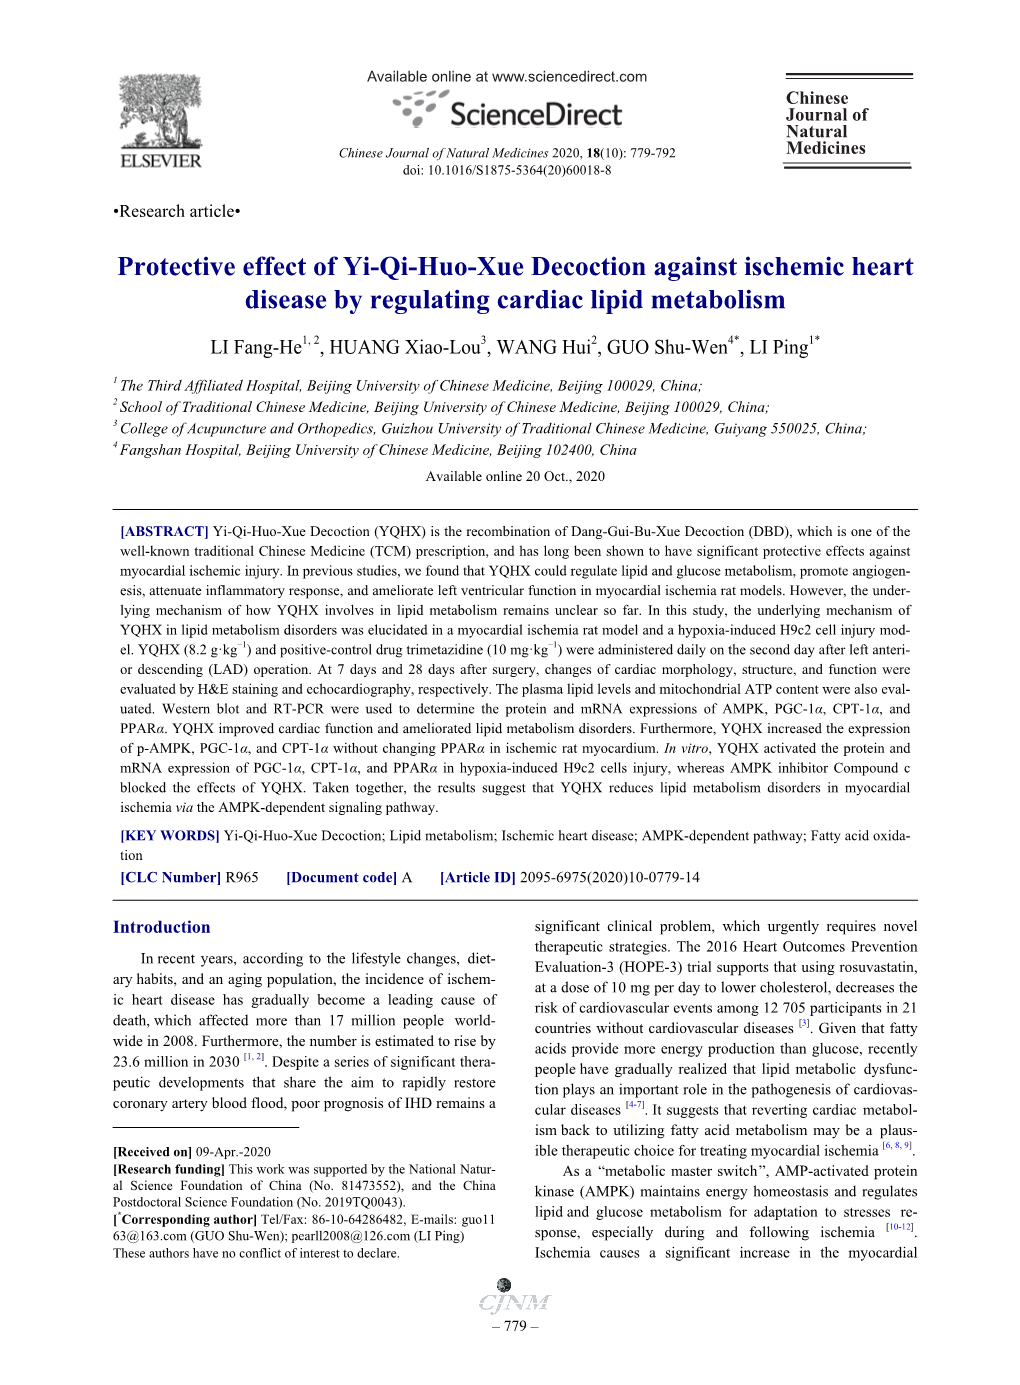 Protective Effect of Yi-Qi-Huo-Xue Decoction Against Ischemic Heart Disease by Regulating Cardiac Lipid Metabolism